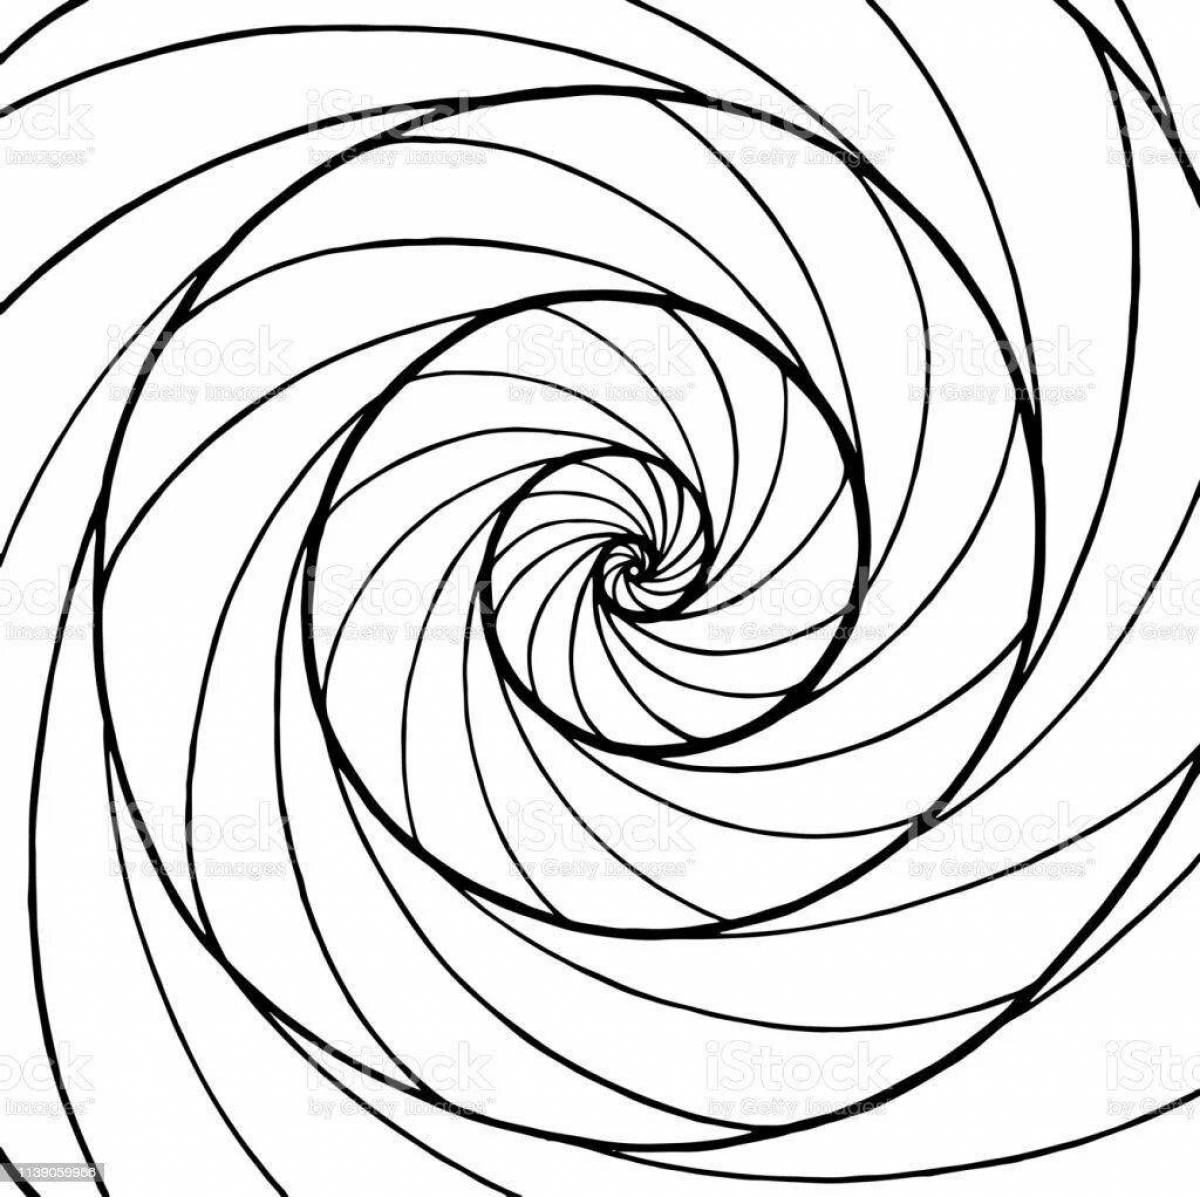 Betty fun spiral coloring page